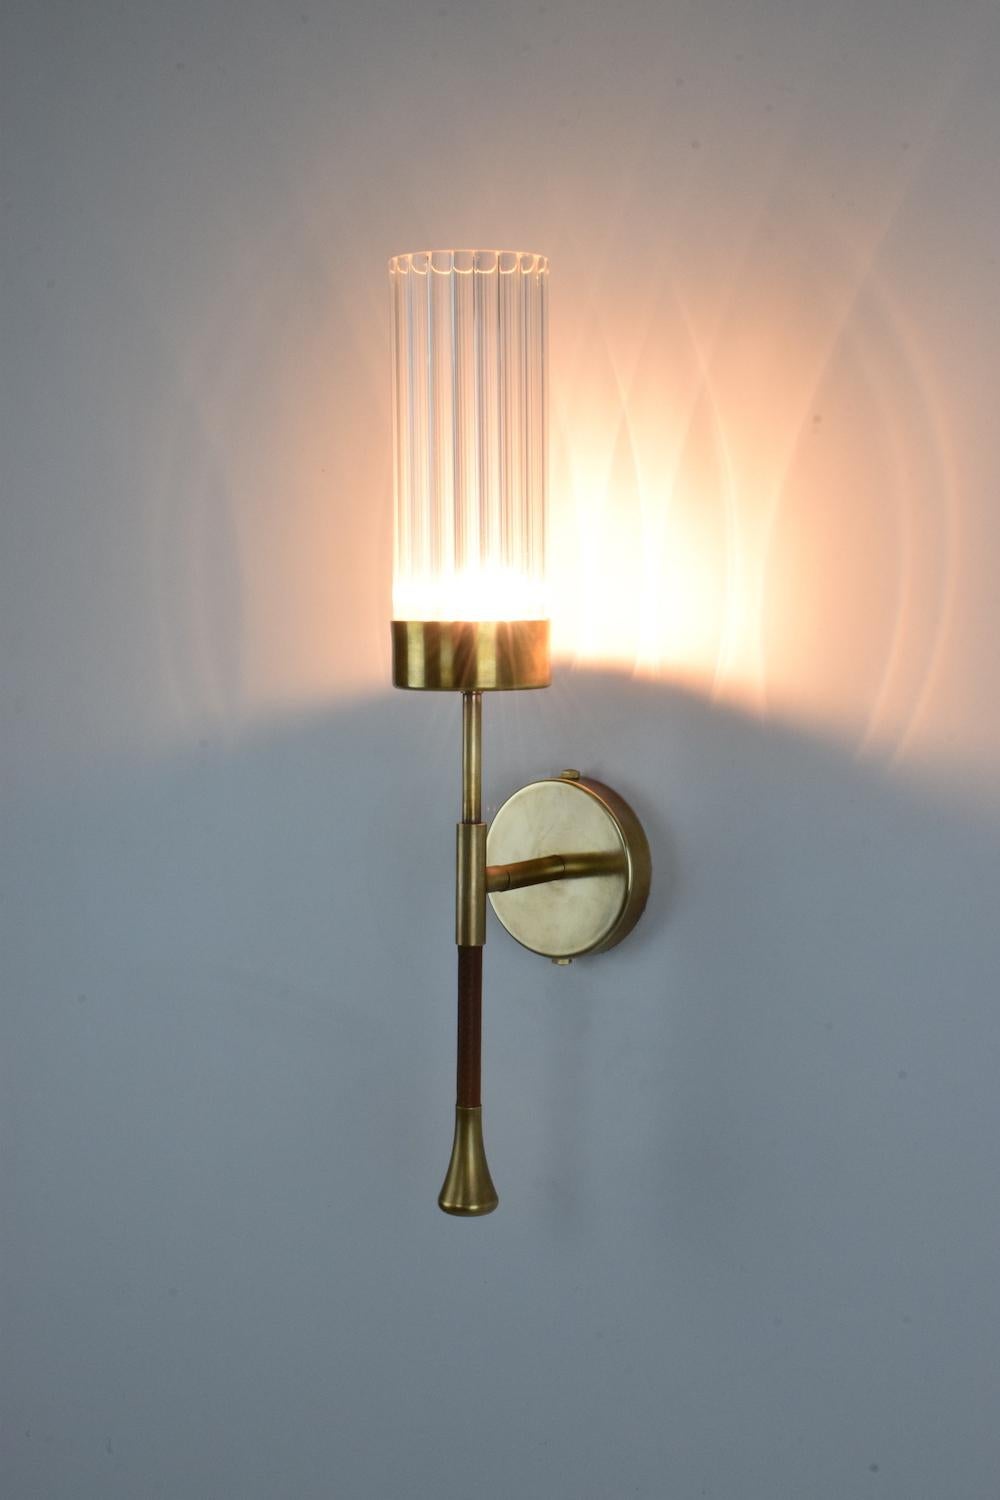 A timeless wall light built in a solid brass structure highlighted by a leather-sheathed stem and a cylinder-textured glass shade. 

Lead Time: 4-5 weeks
Material: solid brass, glass, leather
Shade: textured glass
Leather: brown, black, green,